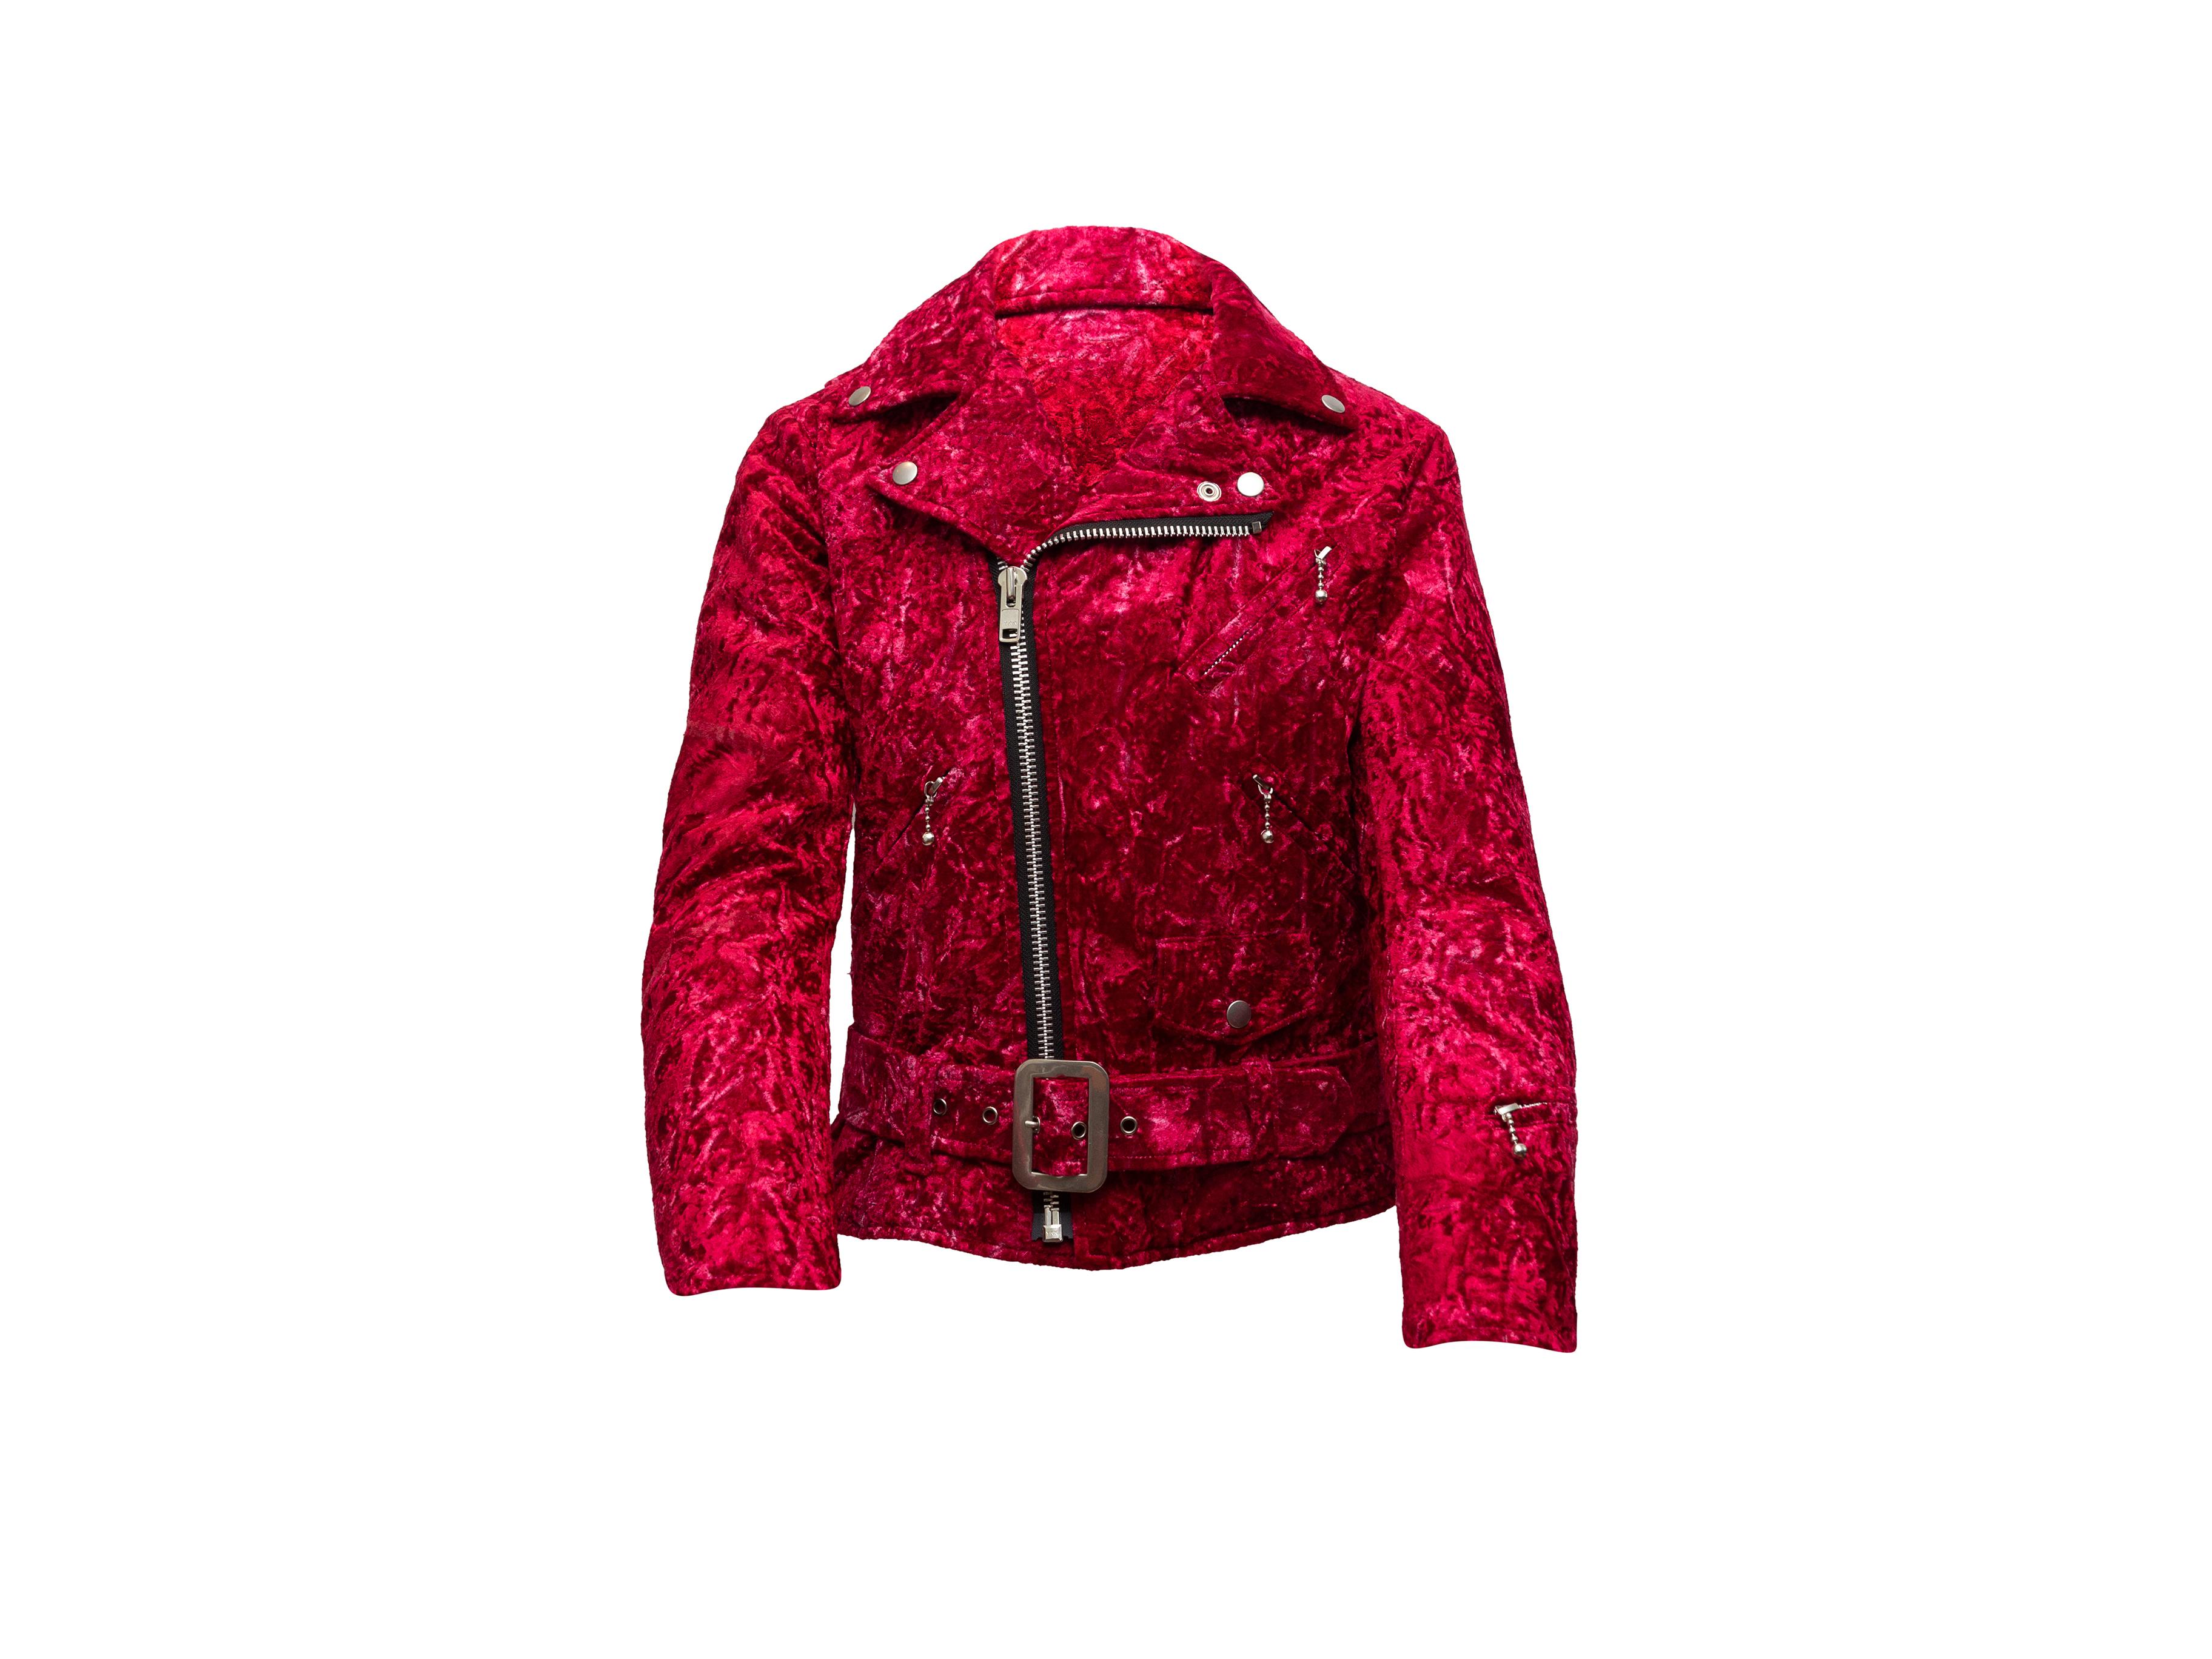 Product details: Red crushed velvet moto jacket by Junya Watanabe Comme Des Garcons. Silver-tone hardware. Multiple front pockets. Belt accent at waist. Zip closure at front. 36